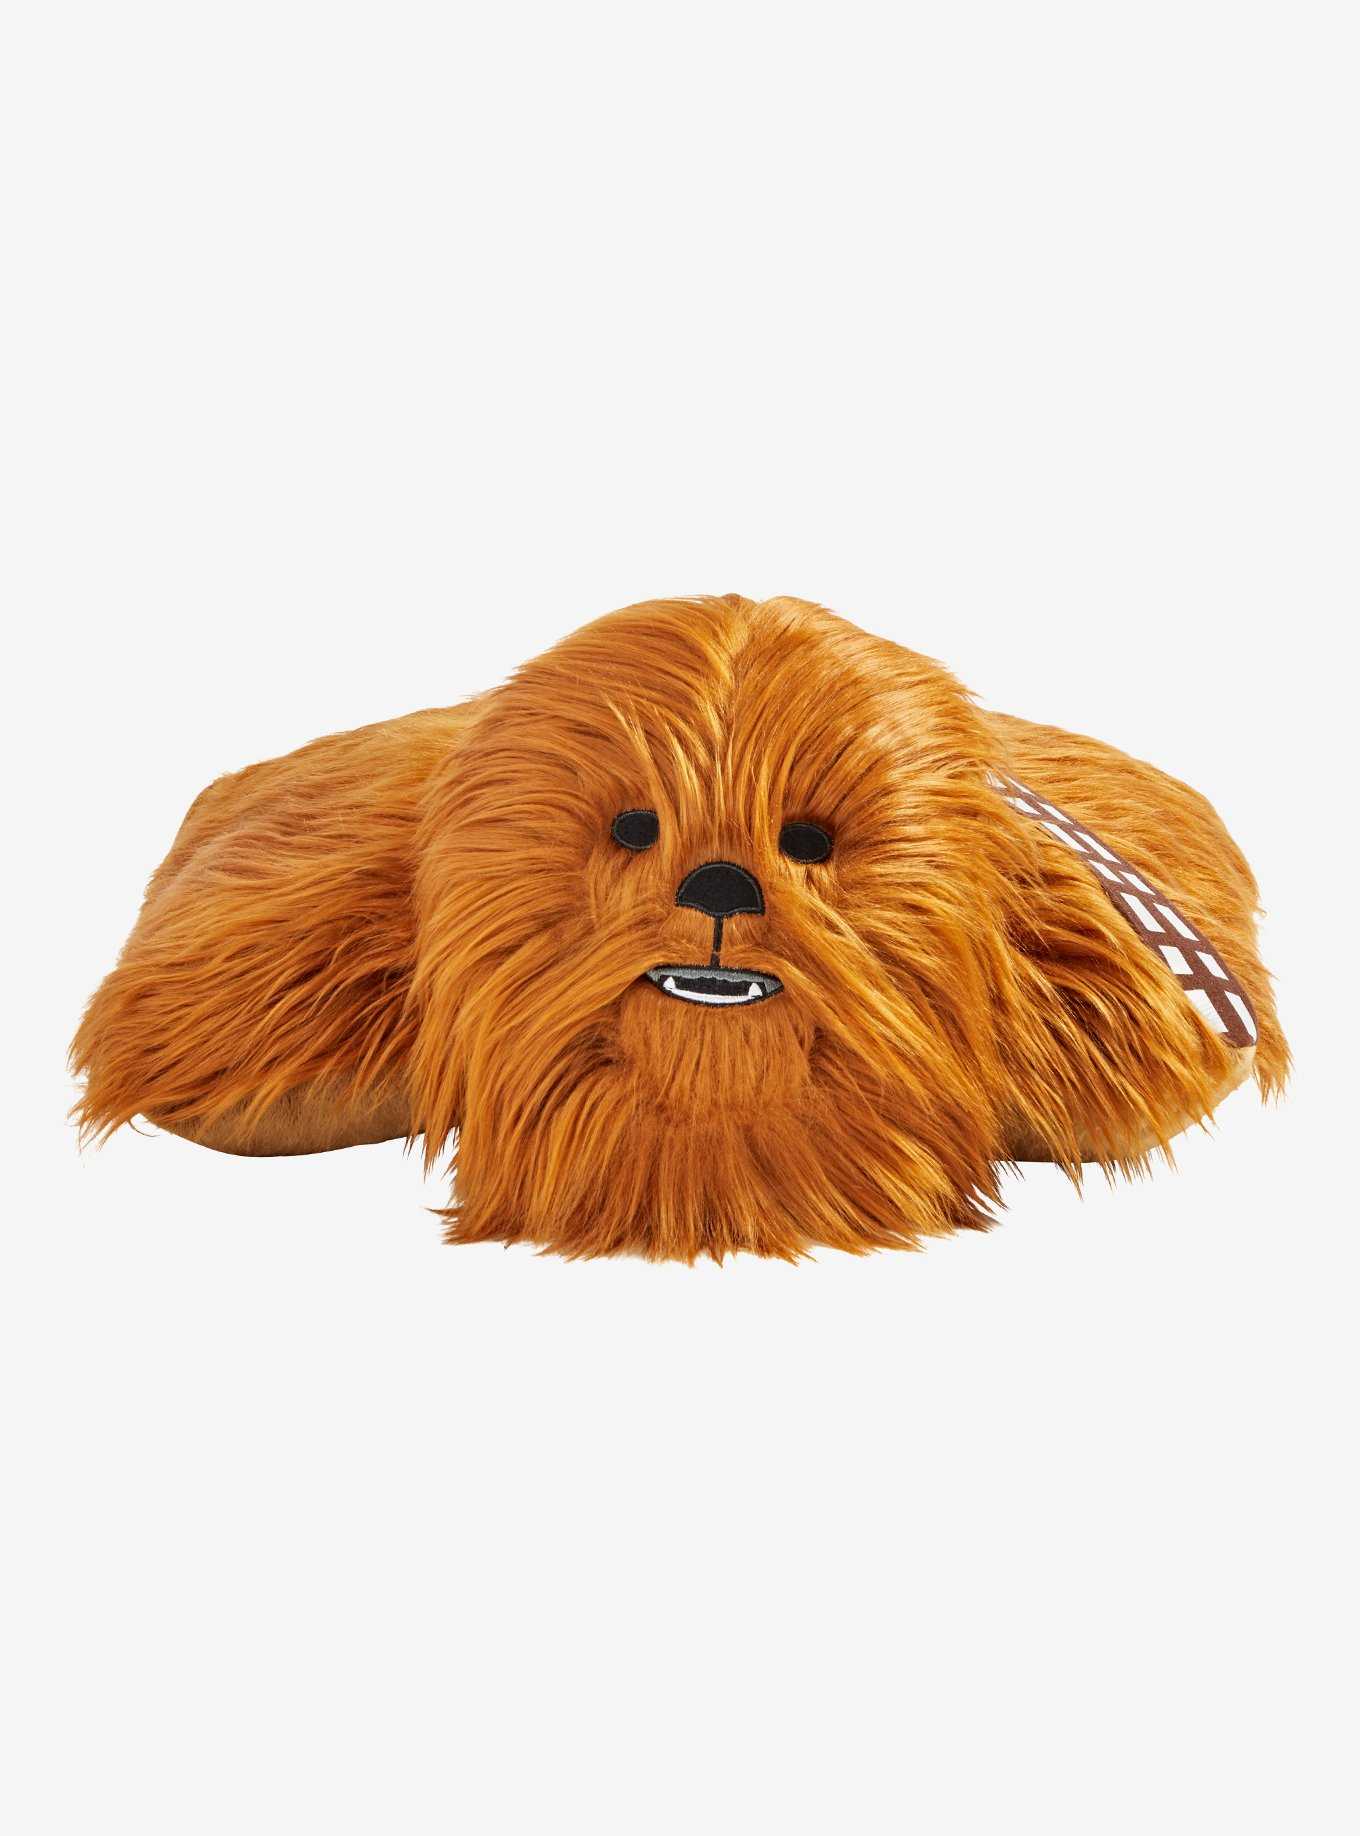 Star Wars Chewbacca Pillow Pets Plush Toy, , hi-res